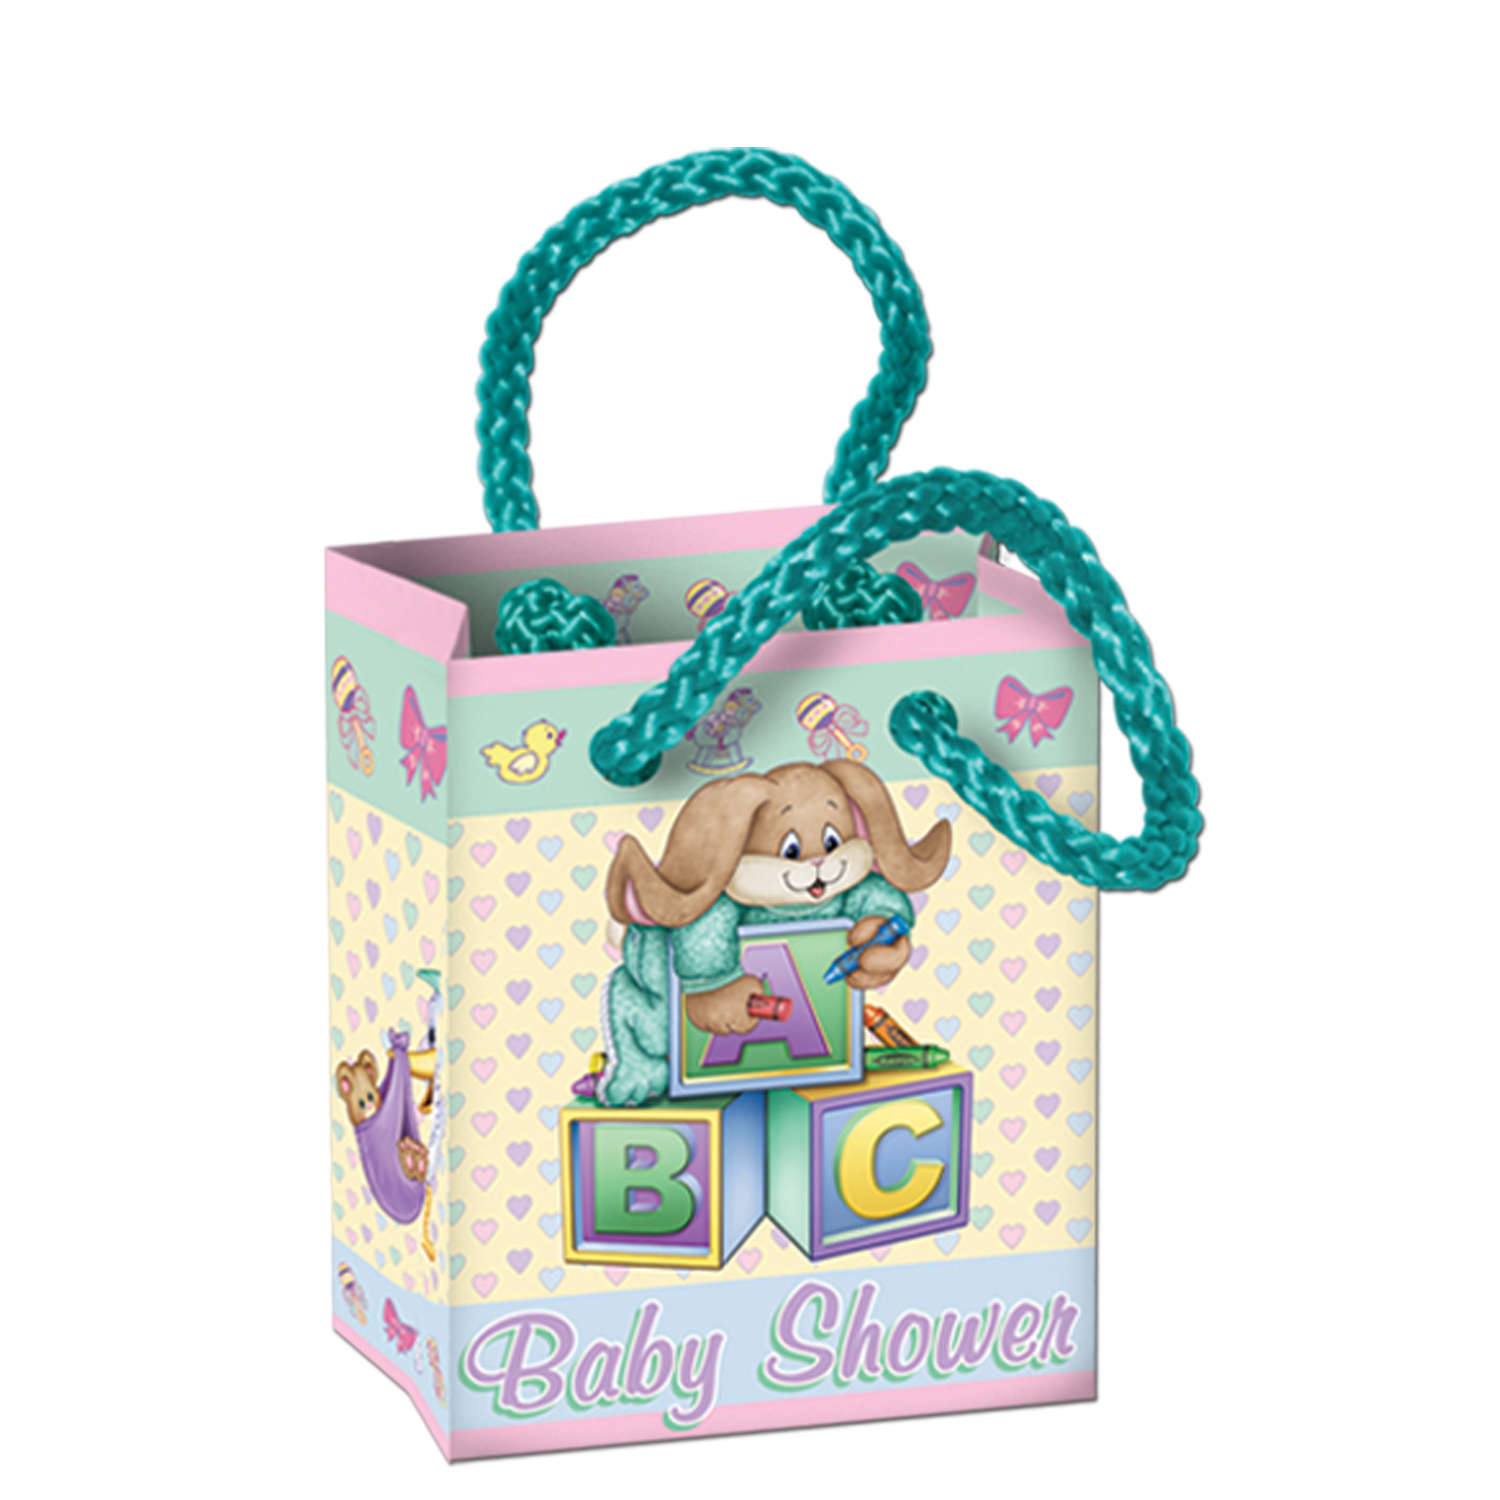 12 Pieces of Cuddle-Time Mini Gift Bag Party Favors